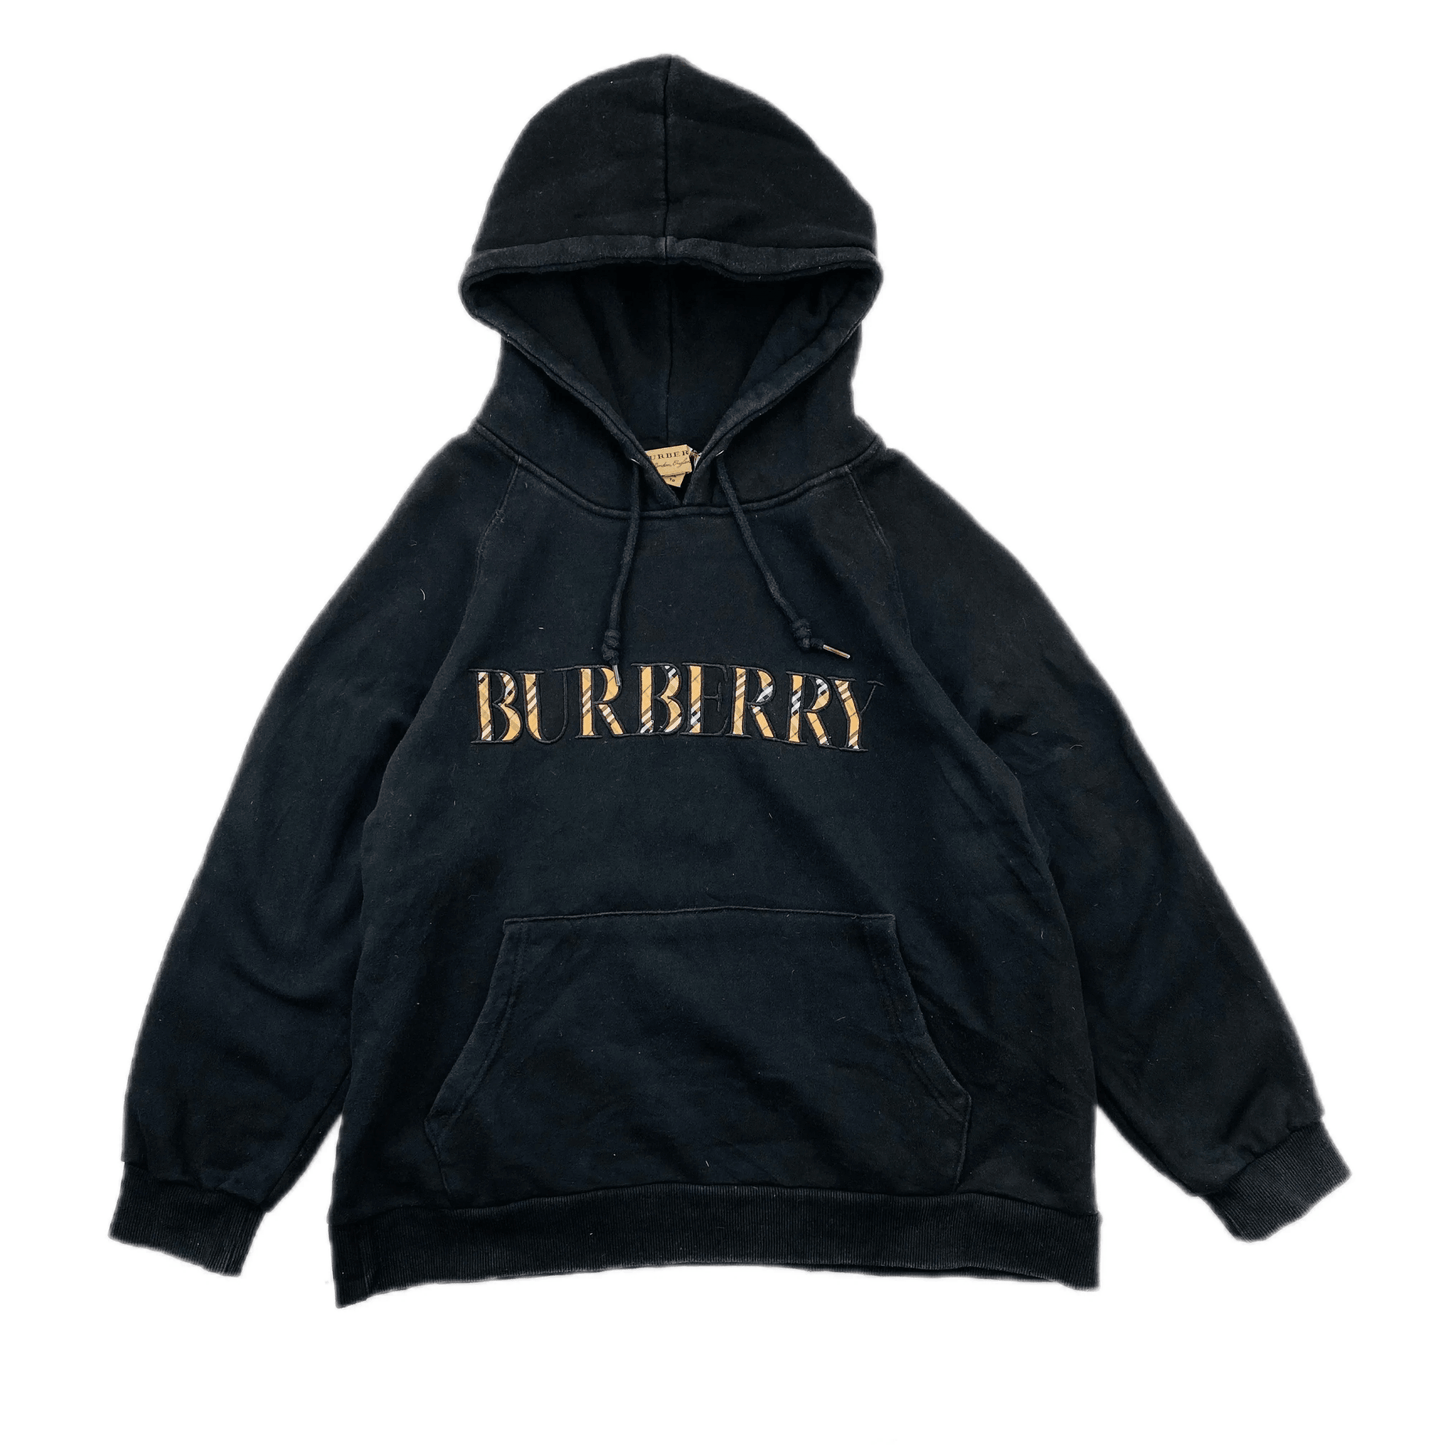 BURBERRY SPELLOUT HOODY (S) - Known Source